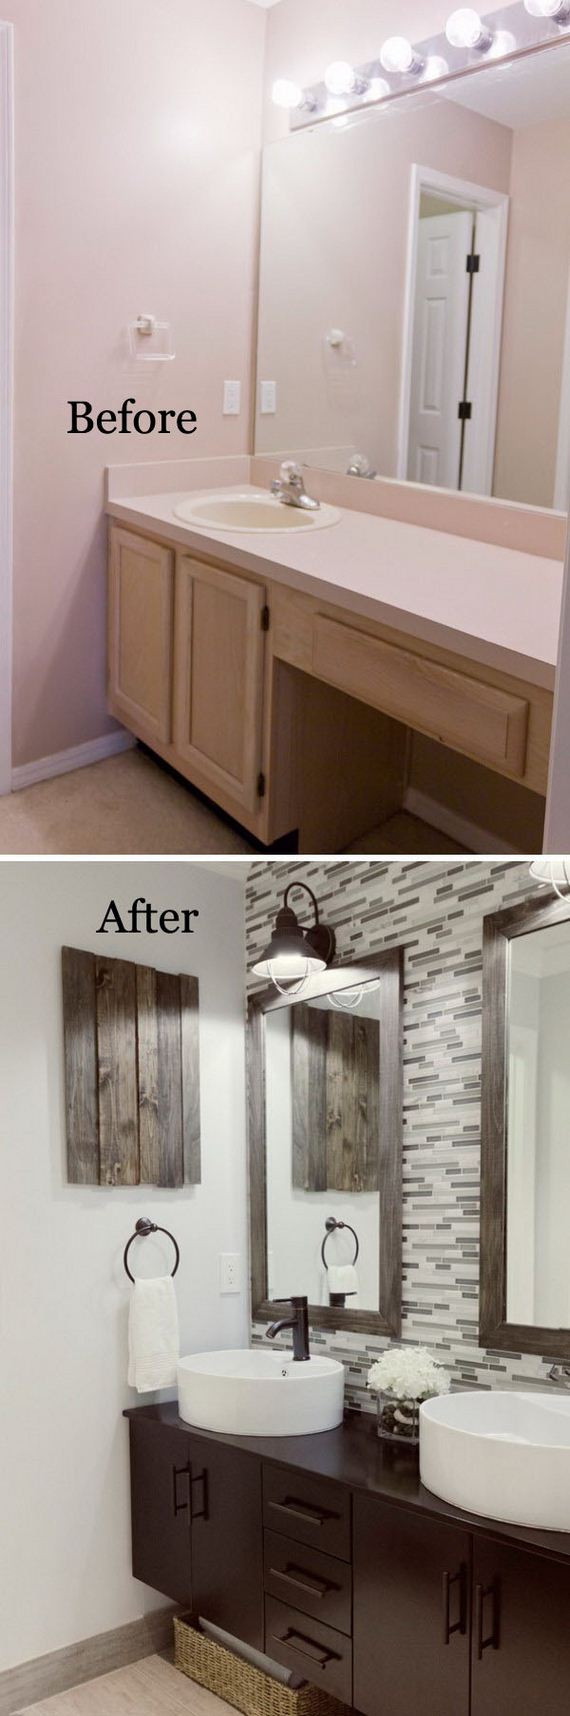 15-awesome-bathroom-makeovers